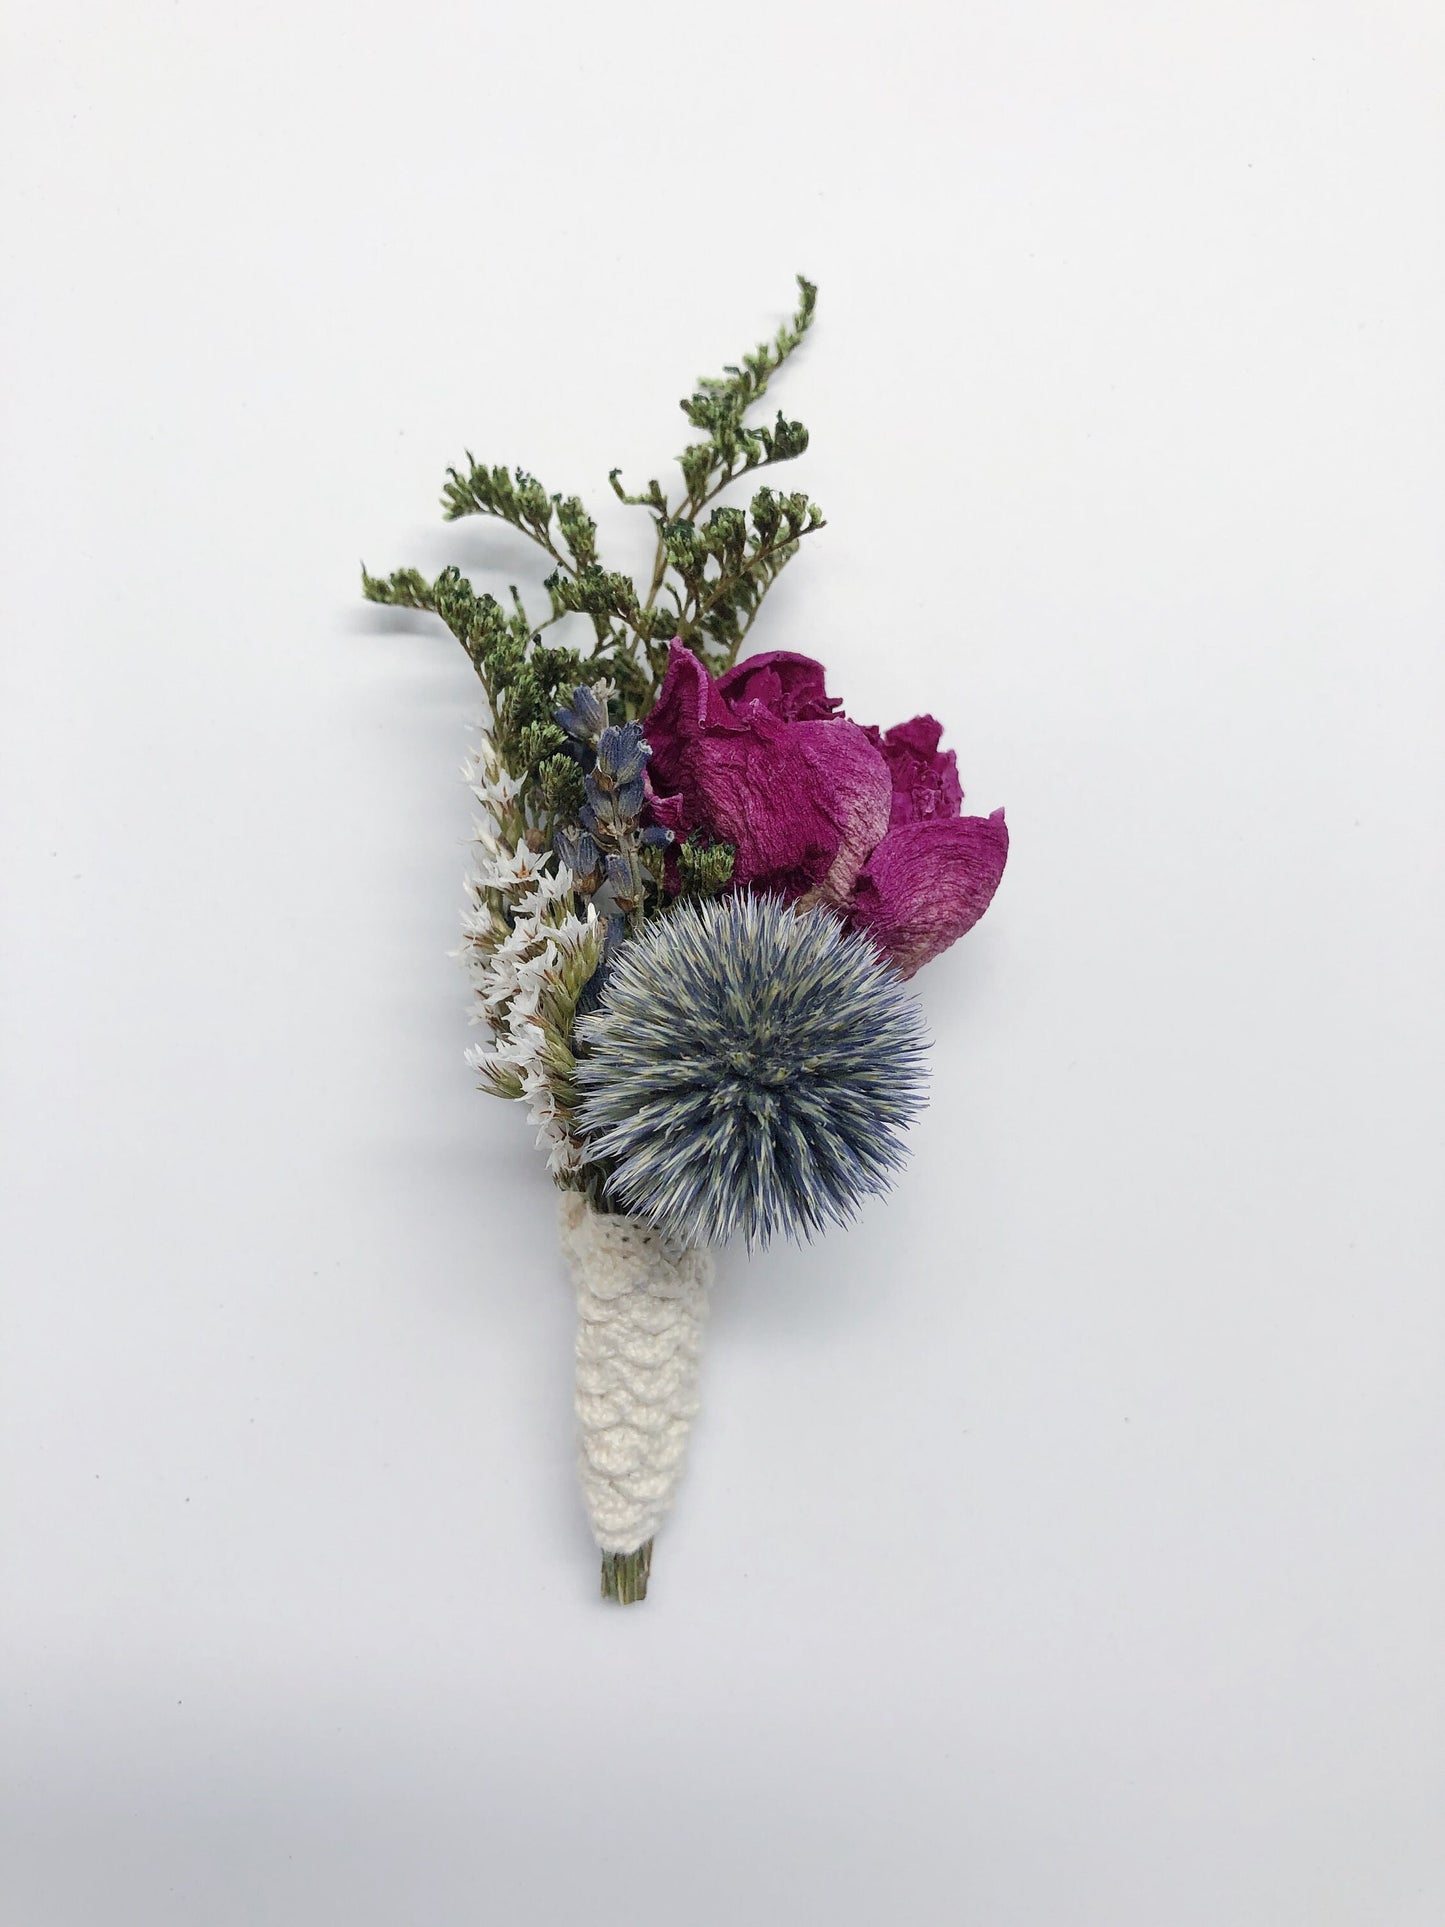 Wedding Bouquet, Preserved Flowers,  globe thistle, Peony, German statice, cotton, colorful, decor, green, pink, blue, burgundy